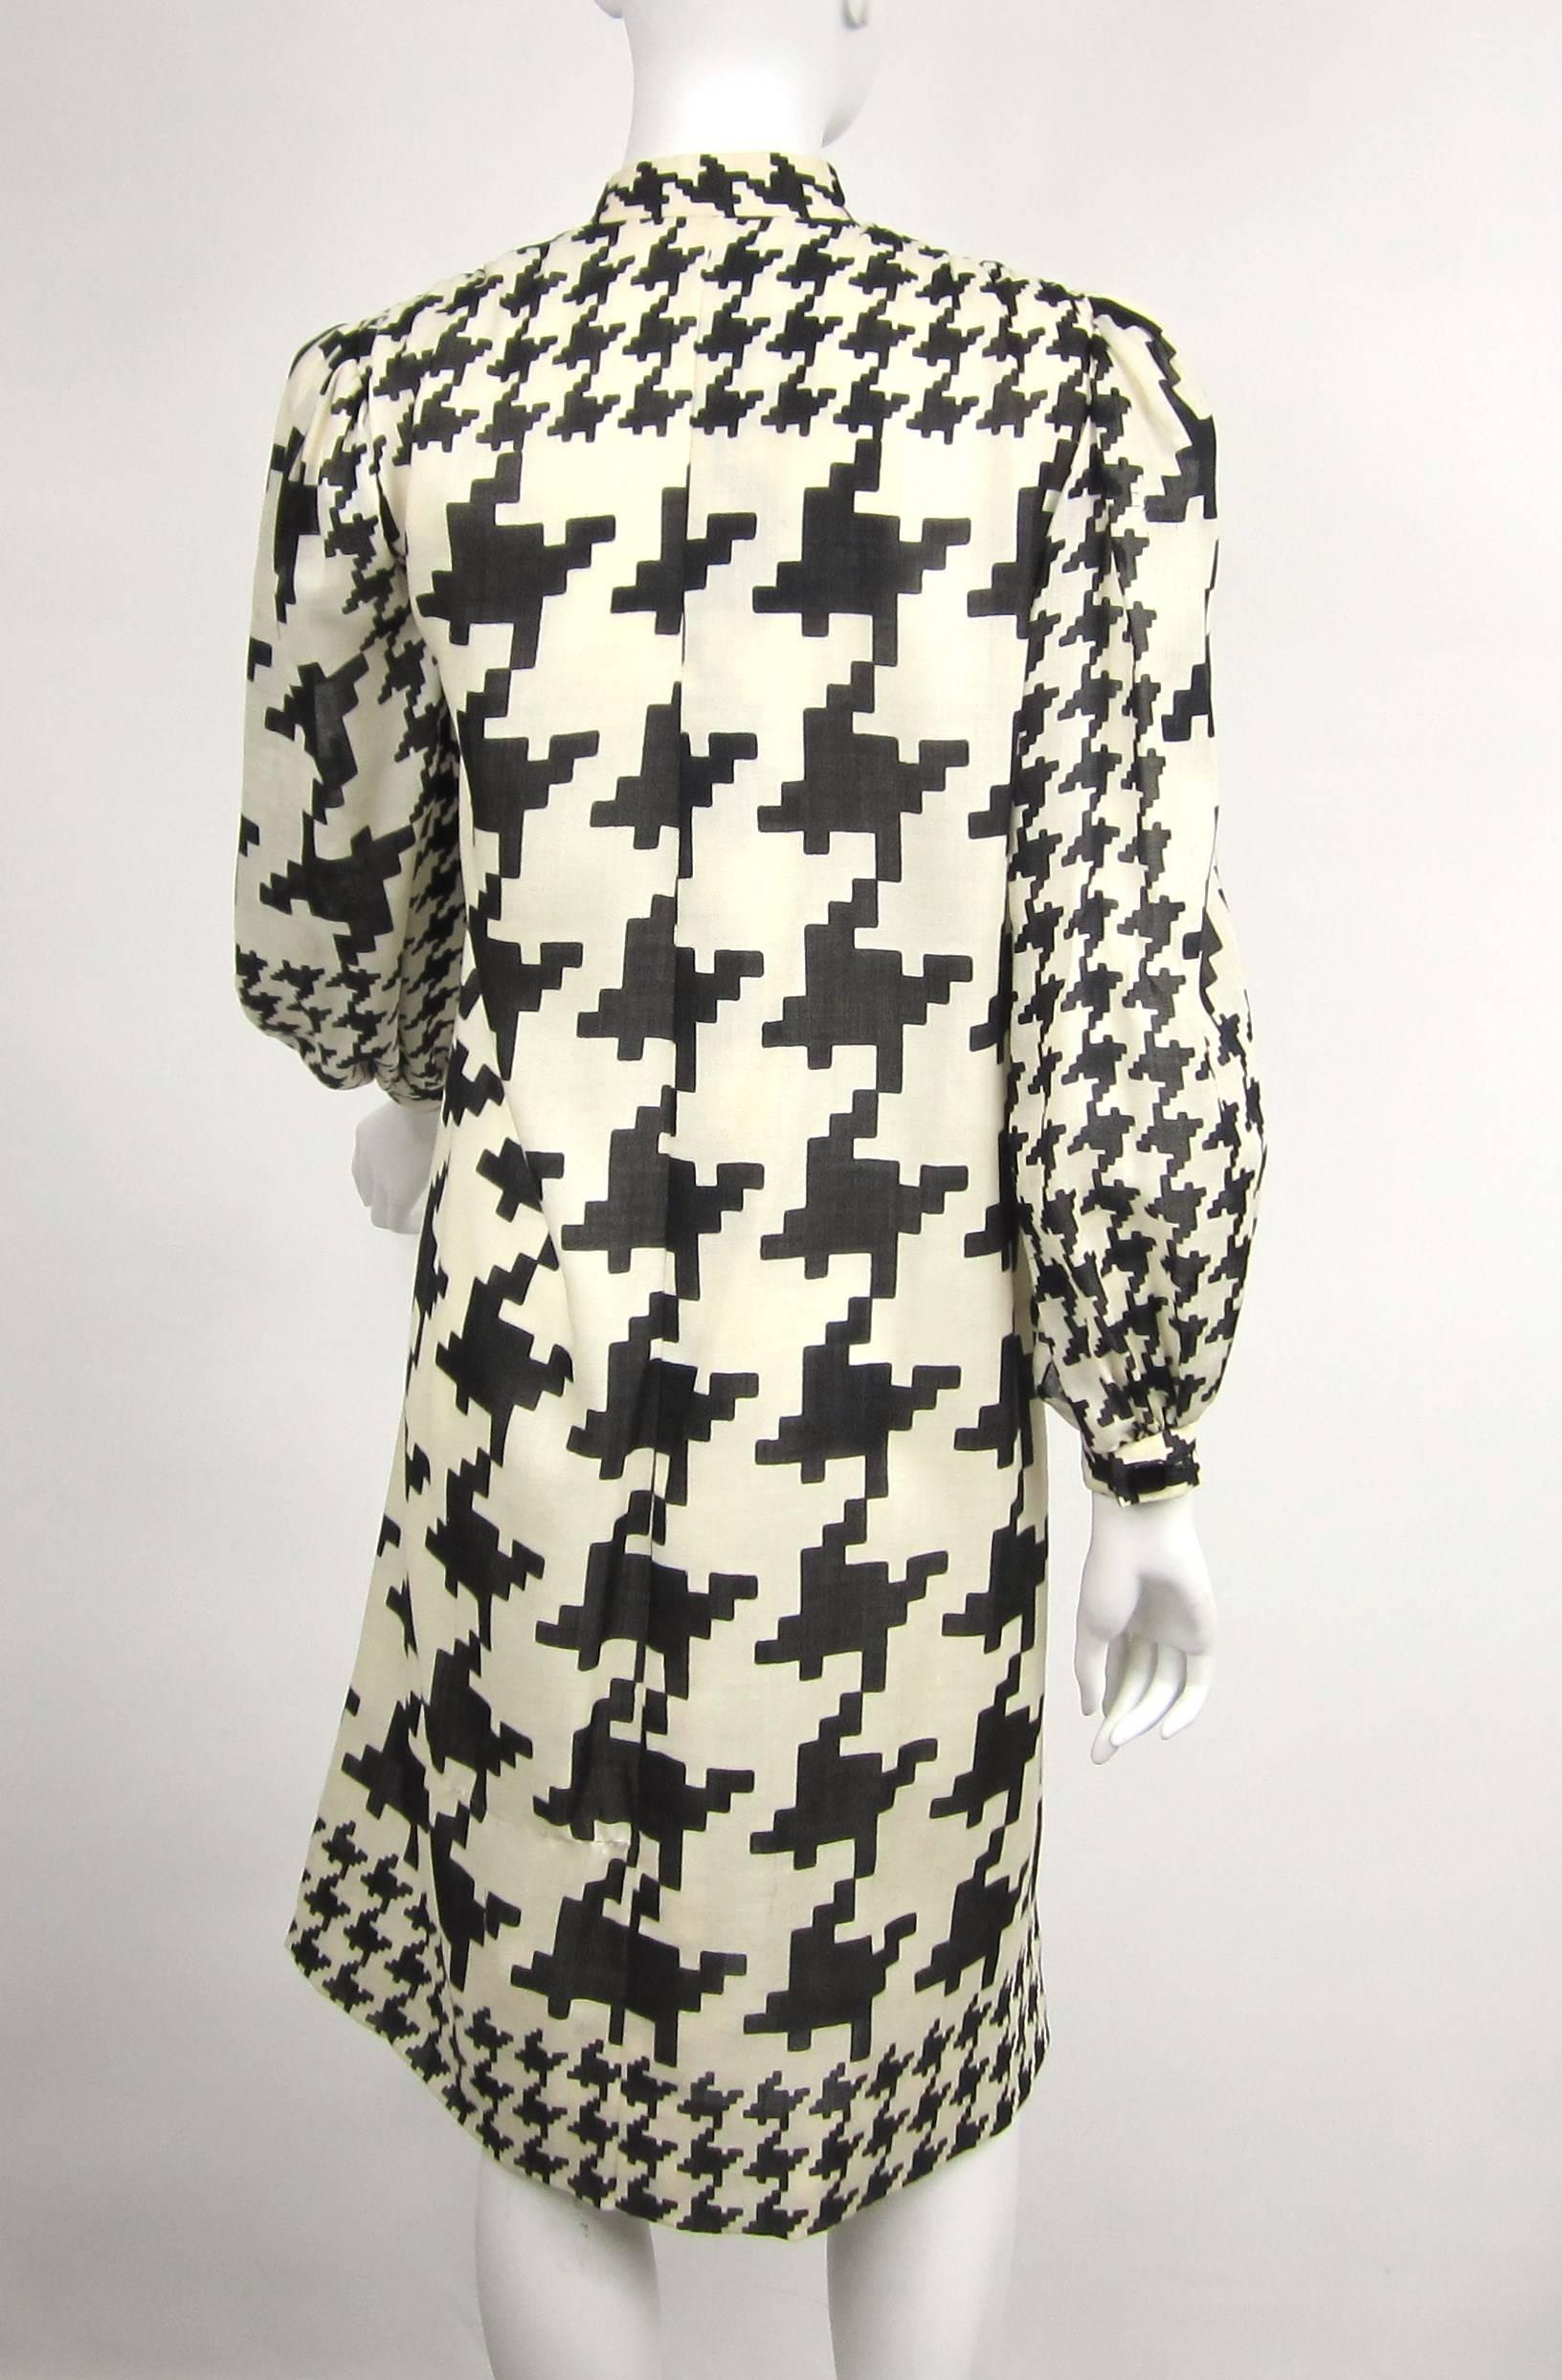 Pauline Trigere Dress Black & White Hounds tooth  In Excellent Condition For Sale In Wallkill, NY